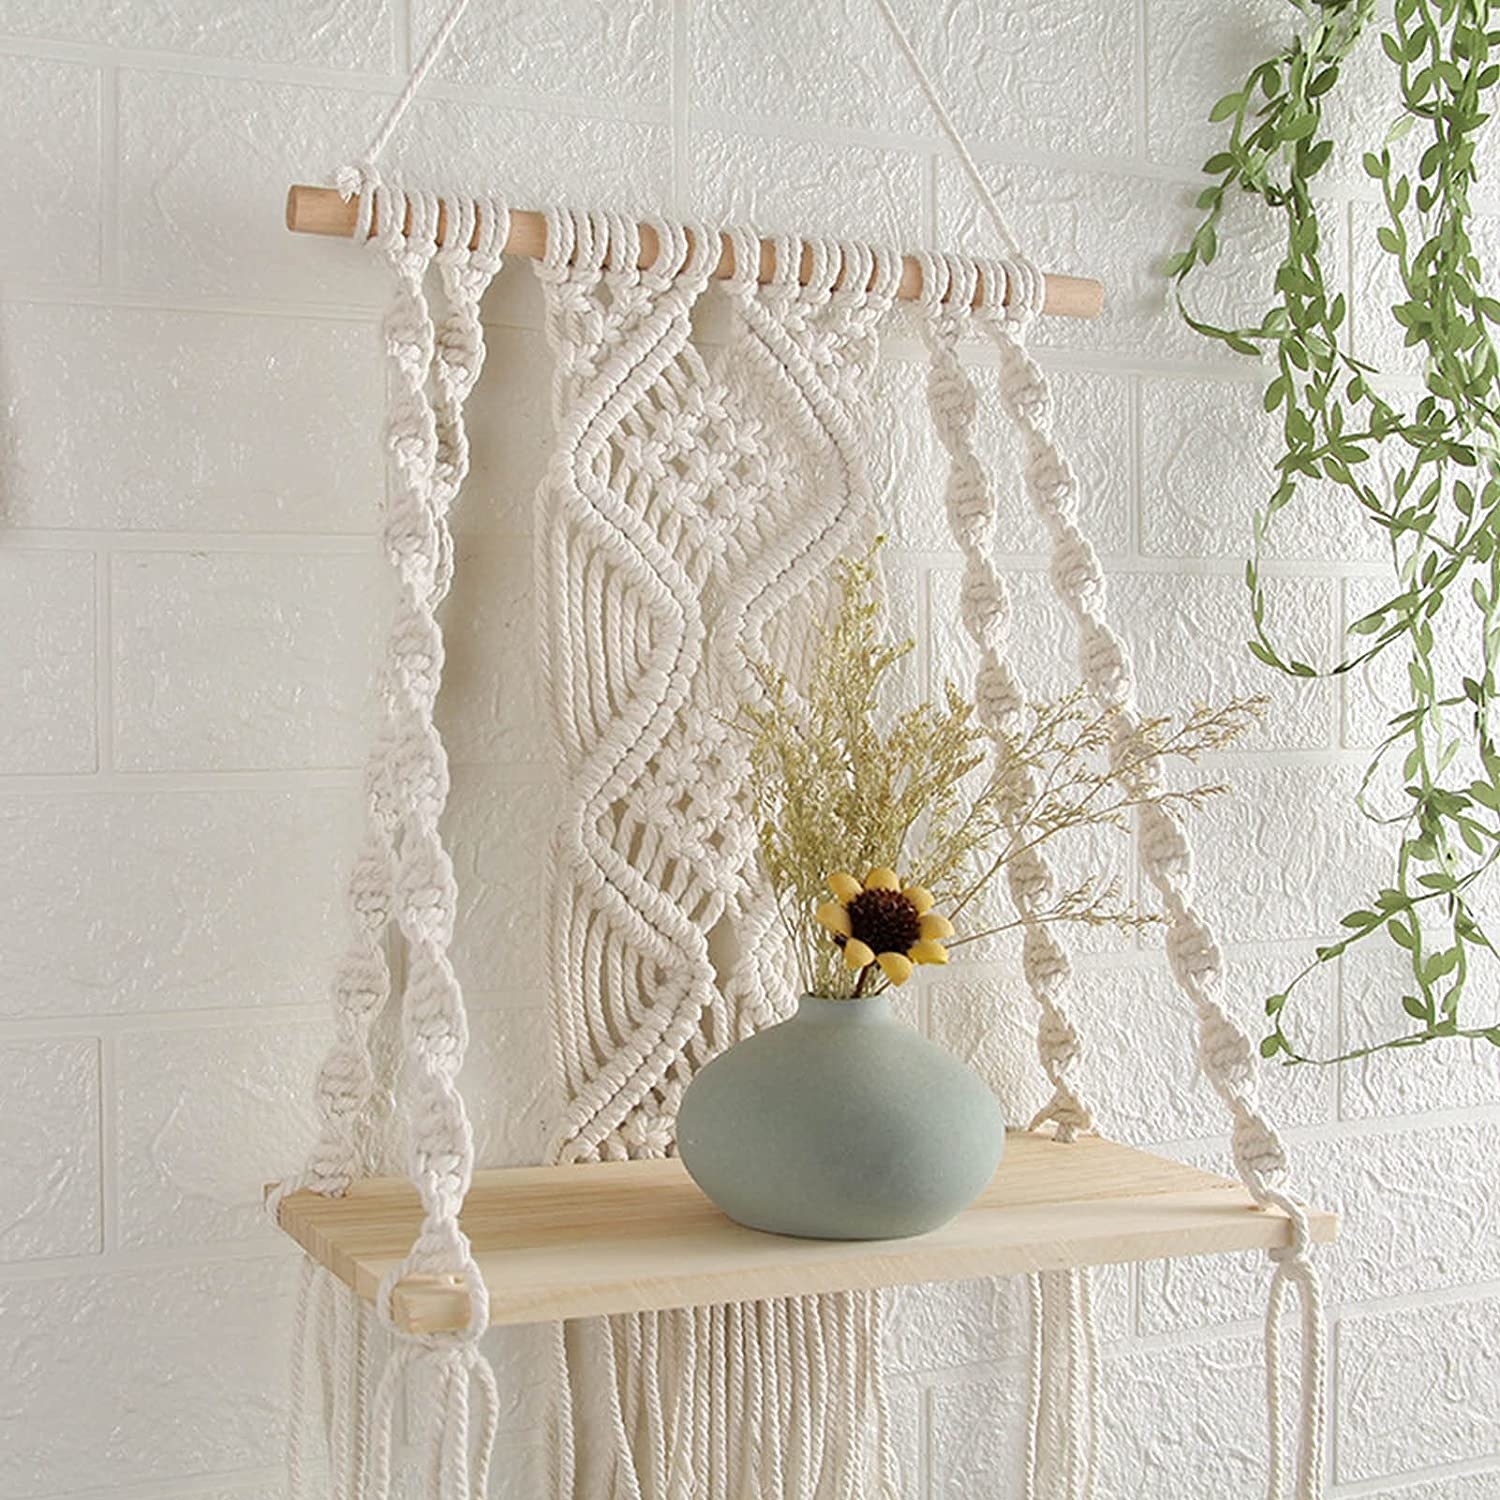 a macrame shelf on a wall holding a vase full of flowers